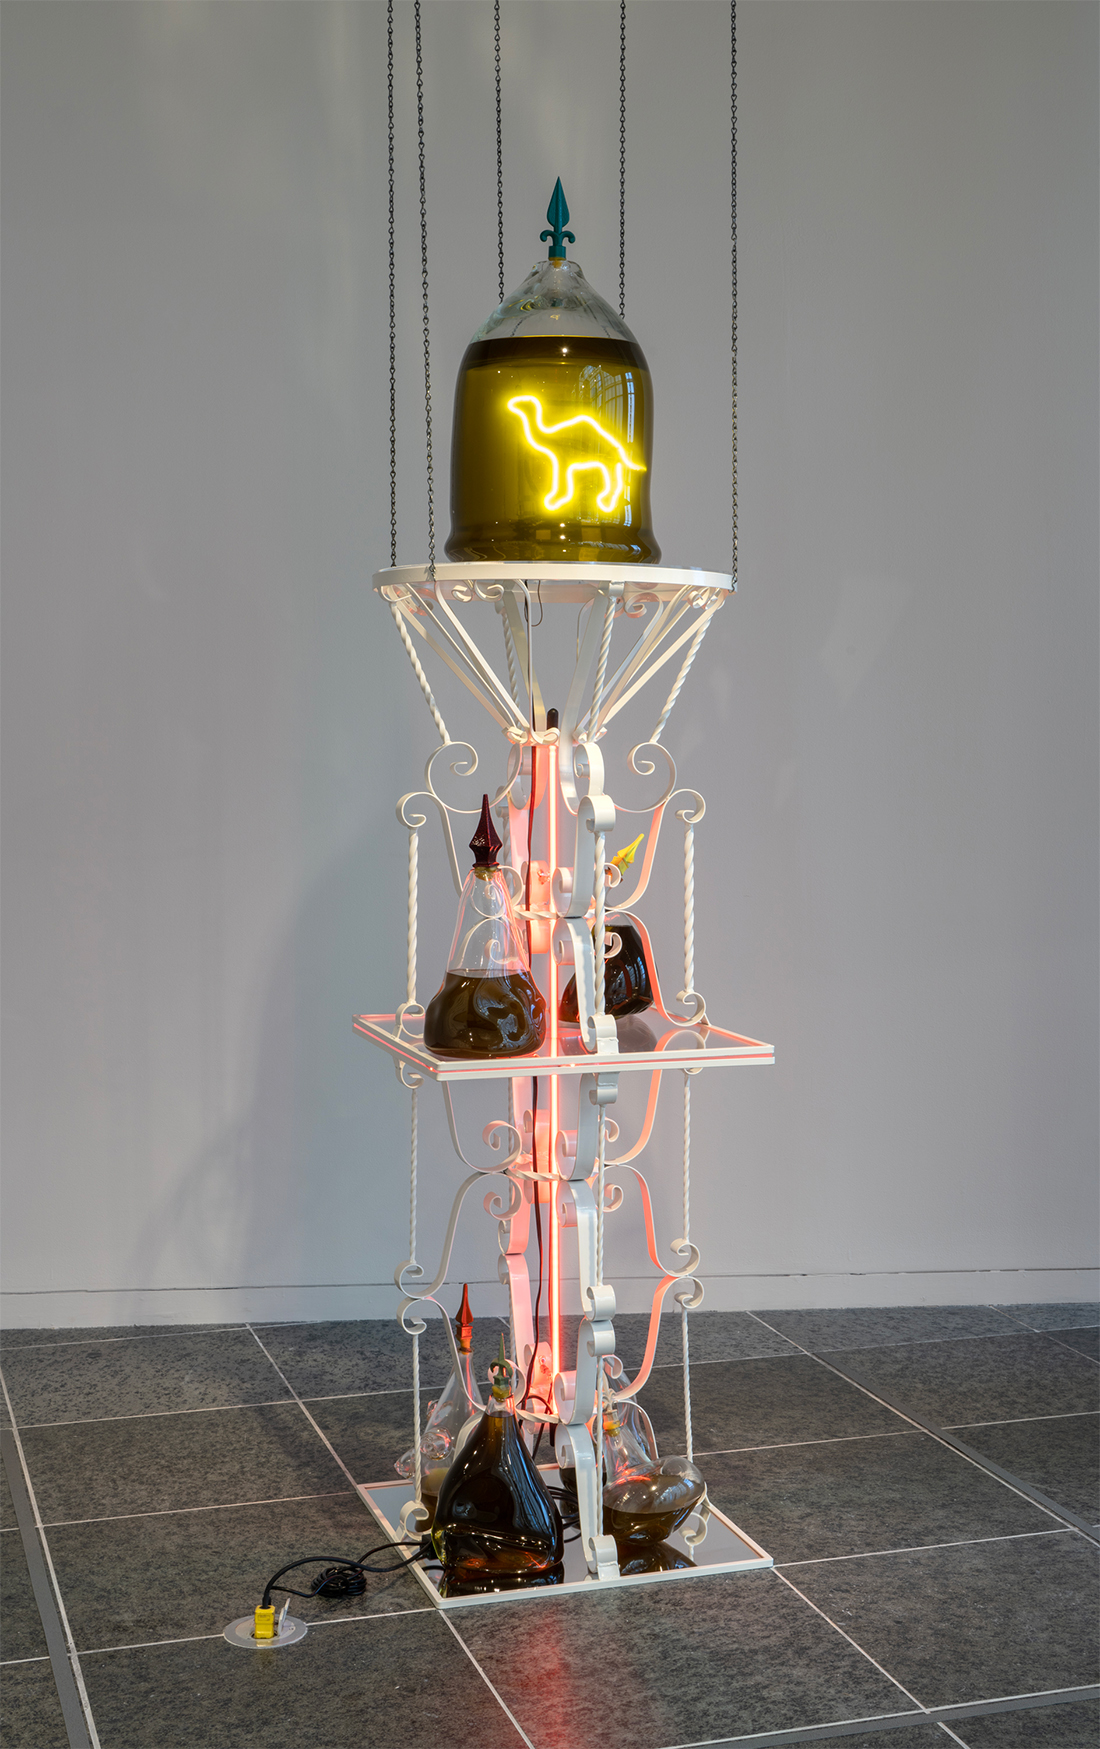 Three-level sculpture of conjoined metal tables. Camel neon light in glass vase full of olive oil at top. Olive oil bottles rest on the tables.